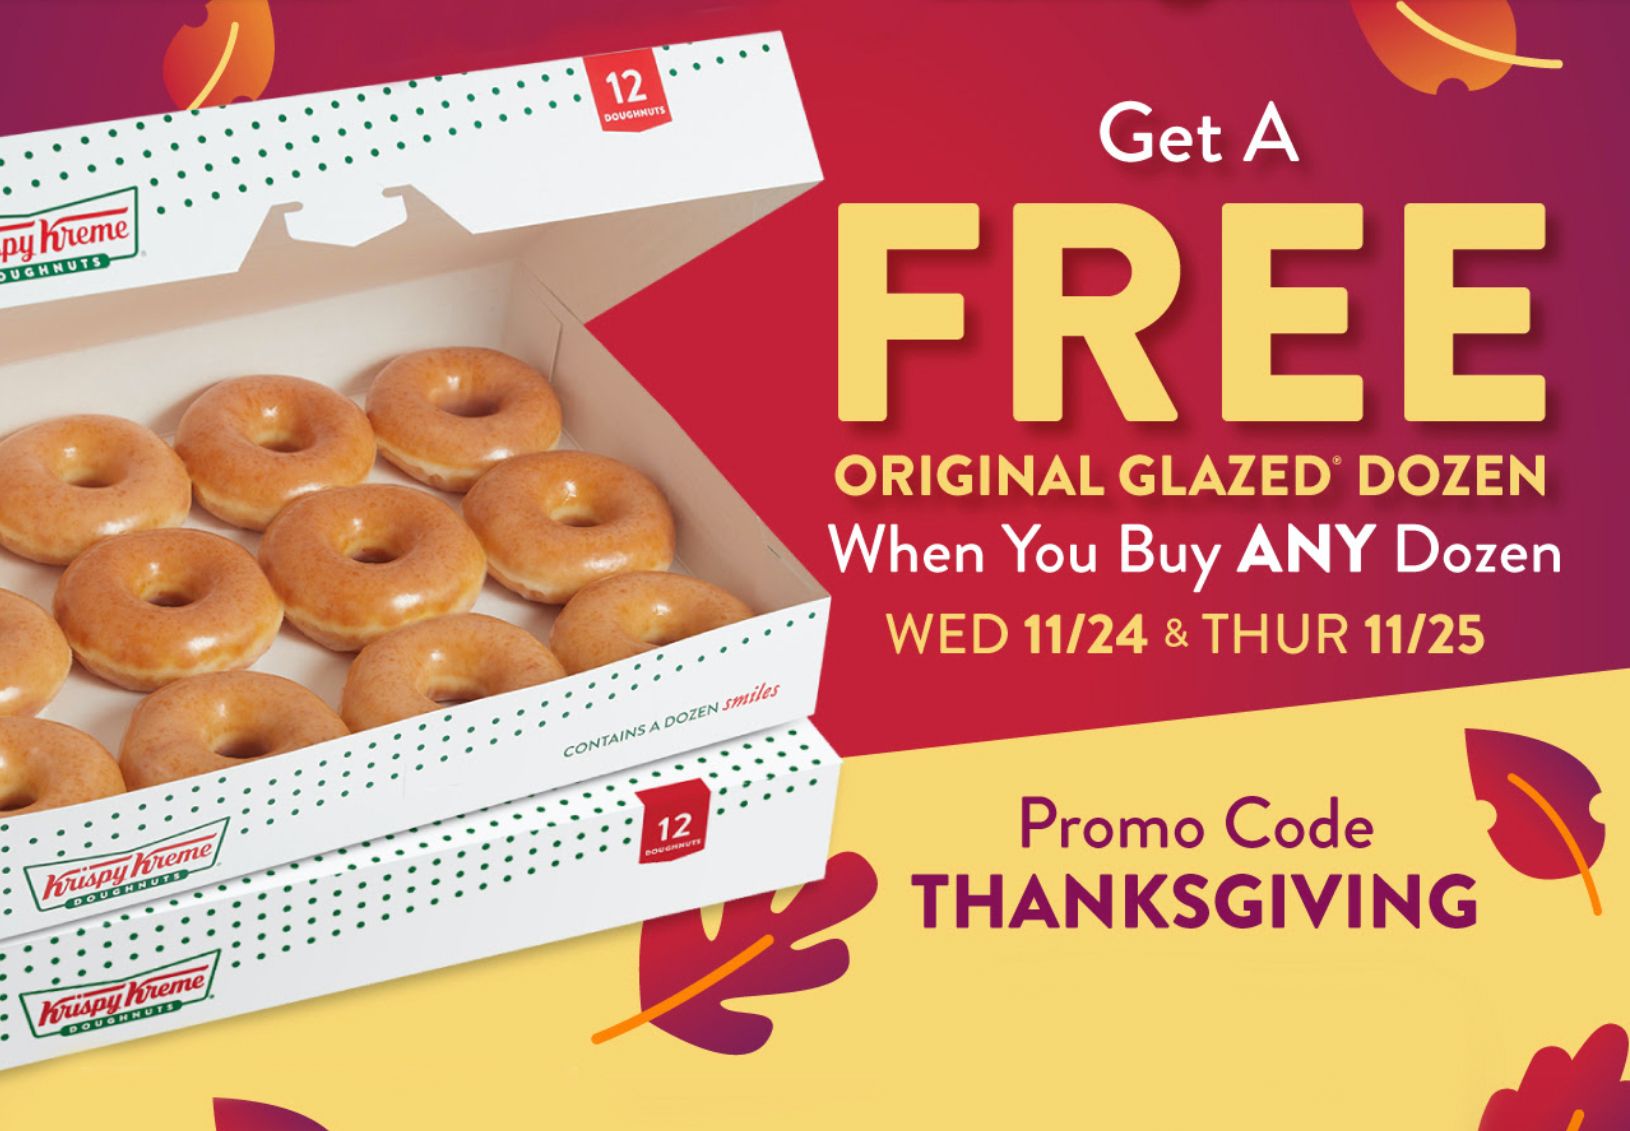 Two Days Only: Get a Free Original Glazed Dozen with the Purchase of a Fully Priced Dozen this Thanksgiving at Krispy Kreme